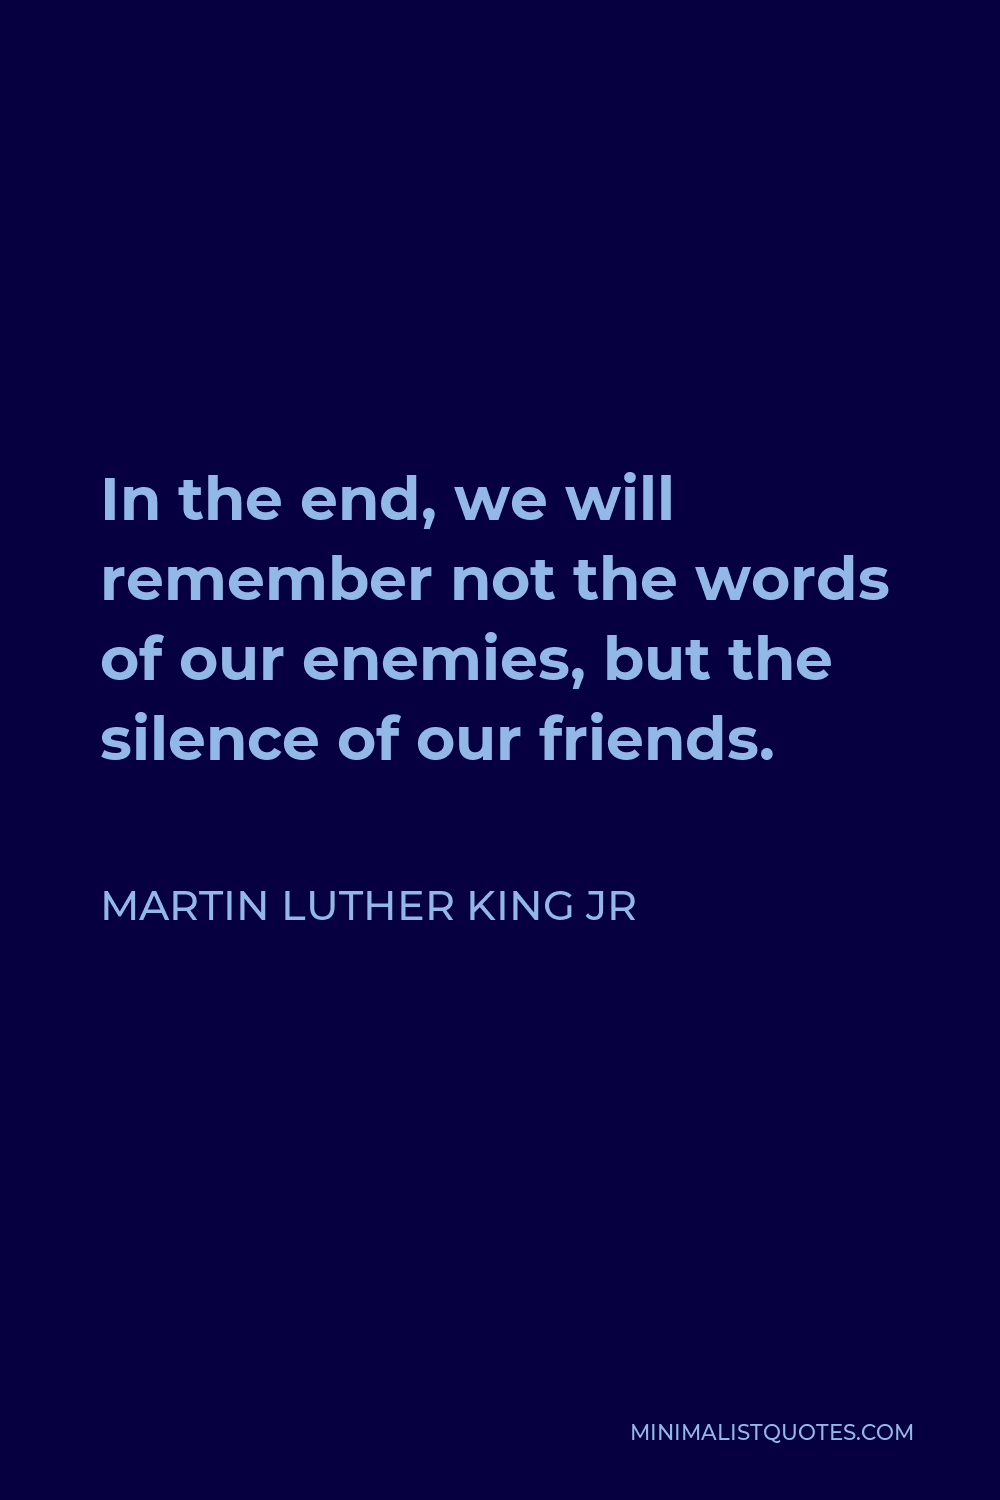 Martin Luther King Jr Quote - In the end, we will remember not the words of our enemies, but the silence of our friends.